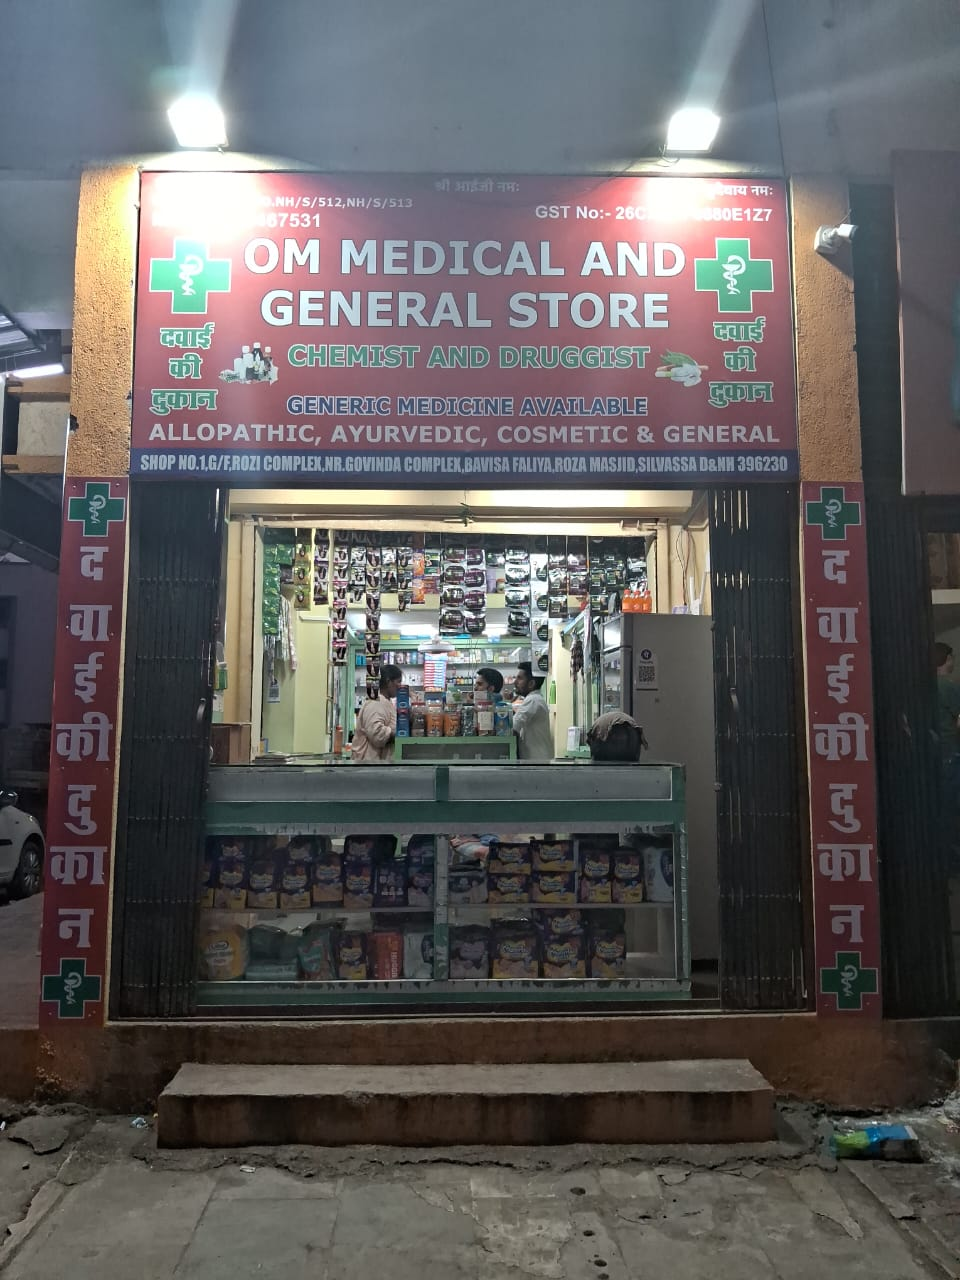 Om Medical and General Store